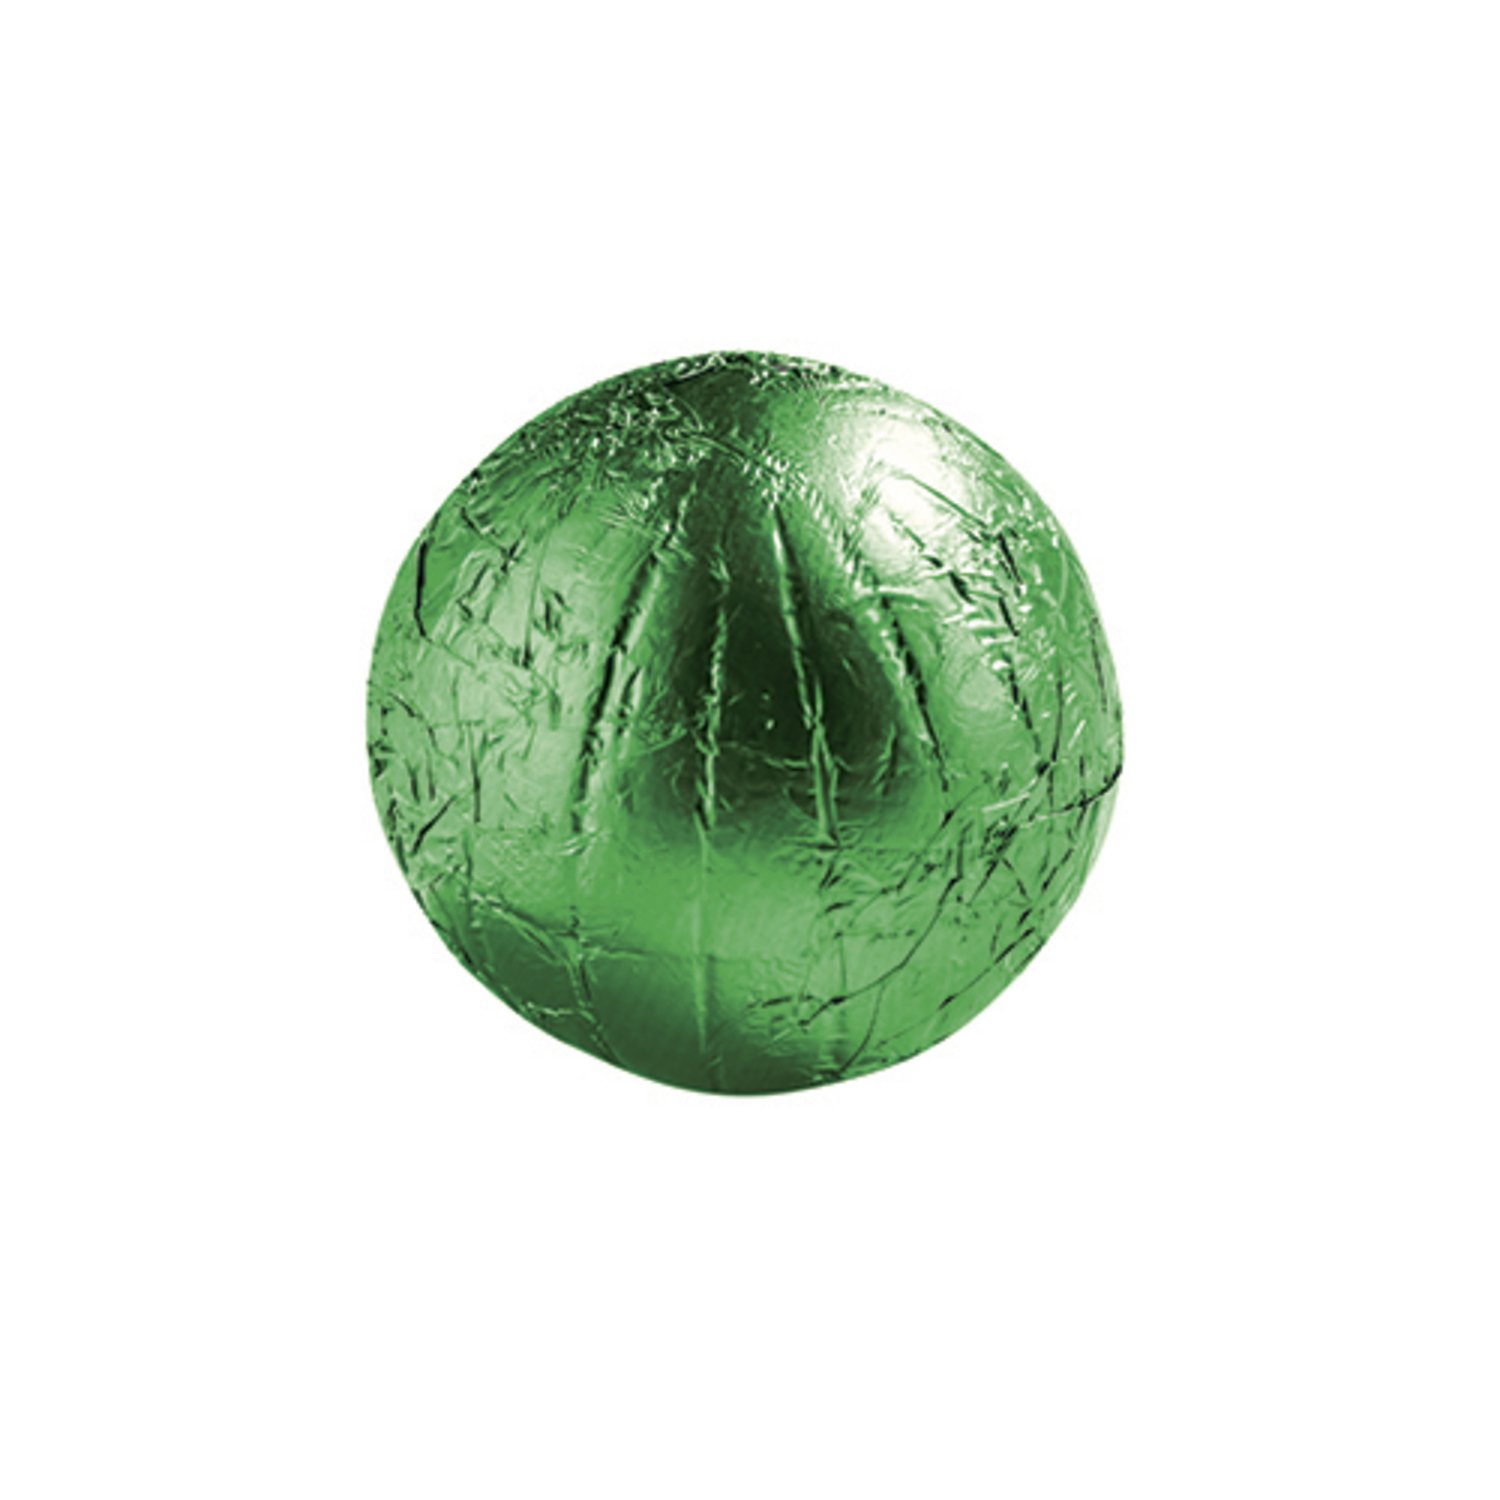 Dasher - green foiled milk sphere with brownie creme filling 10.5g  - 2xkg